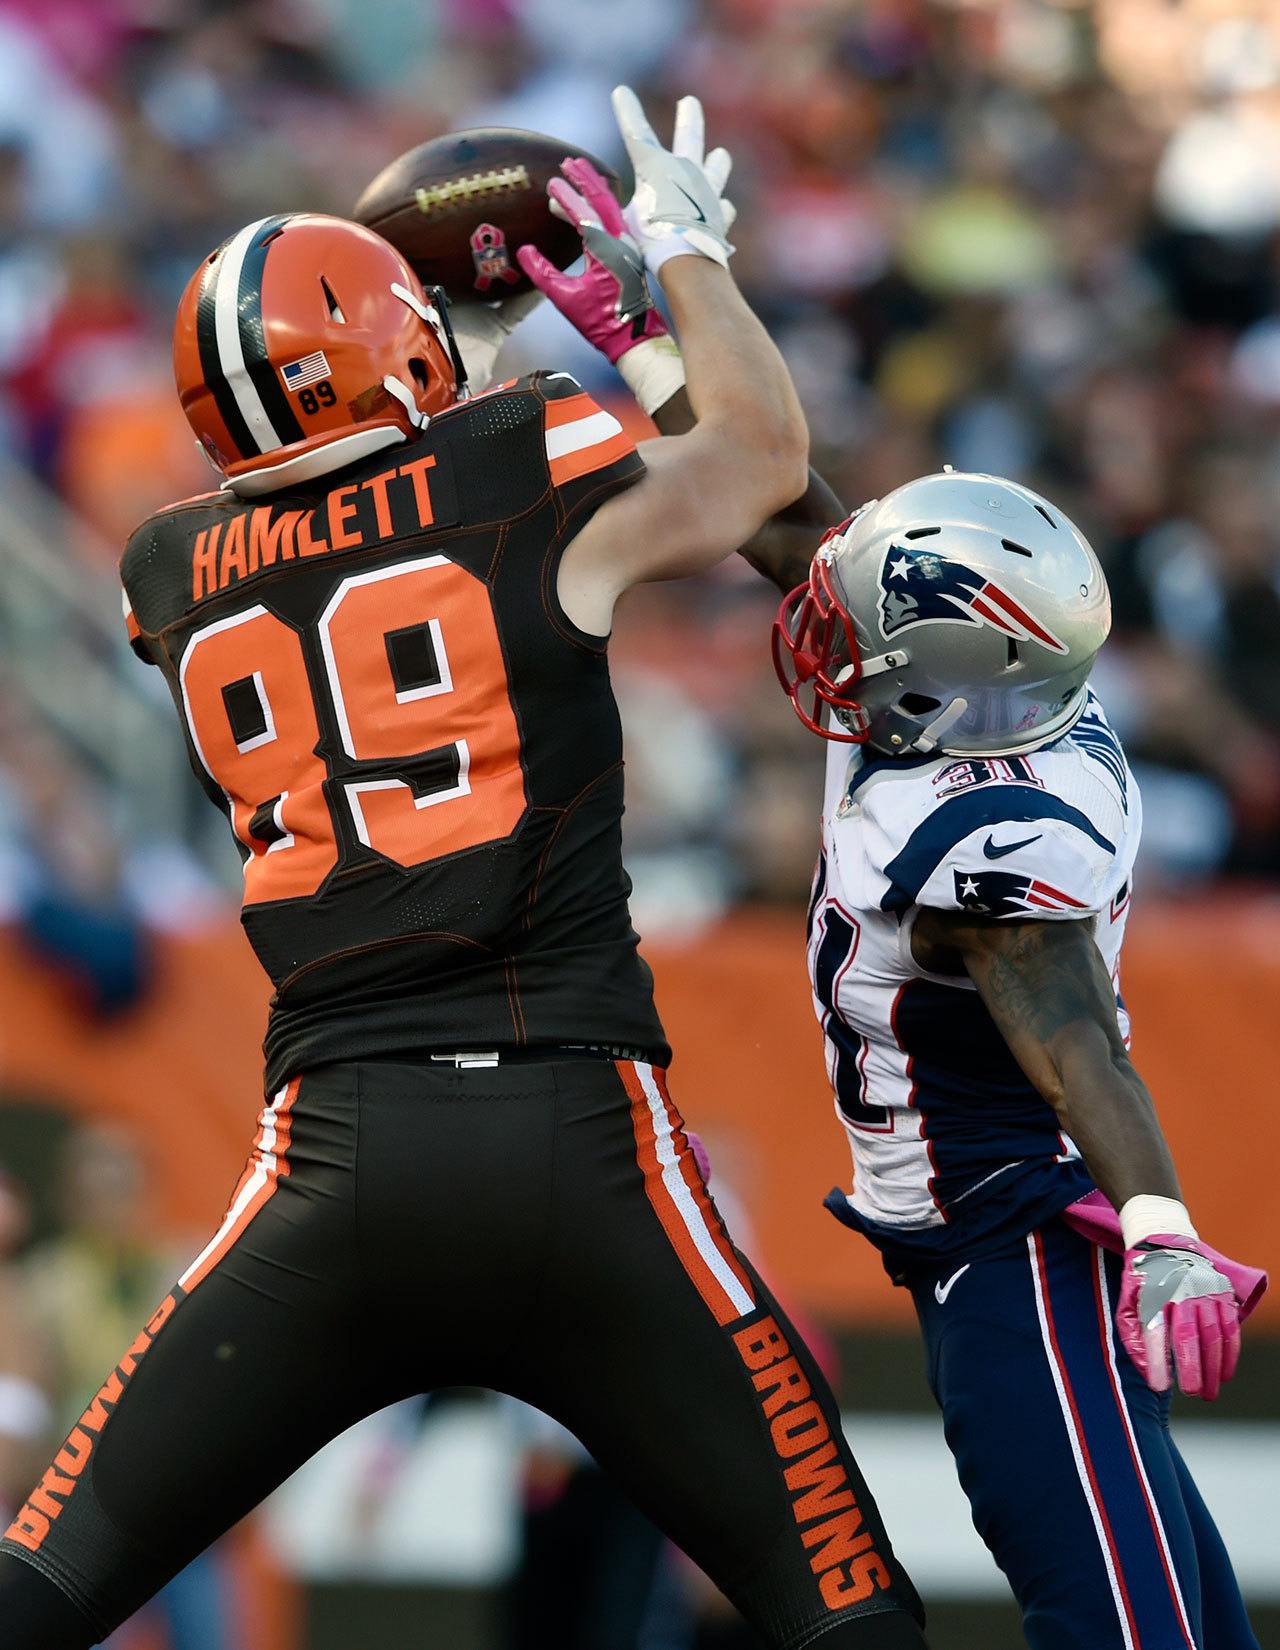 Browns tight end Connor Hamlett (89) catches a touchdown pass over New England Patriots cornerback Jonathan Jones (31) in the second half of a game Sunday in Cleveland. (AP Photo/David Richard)